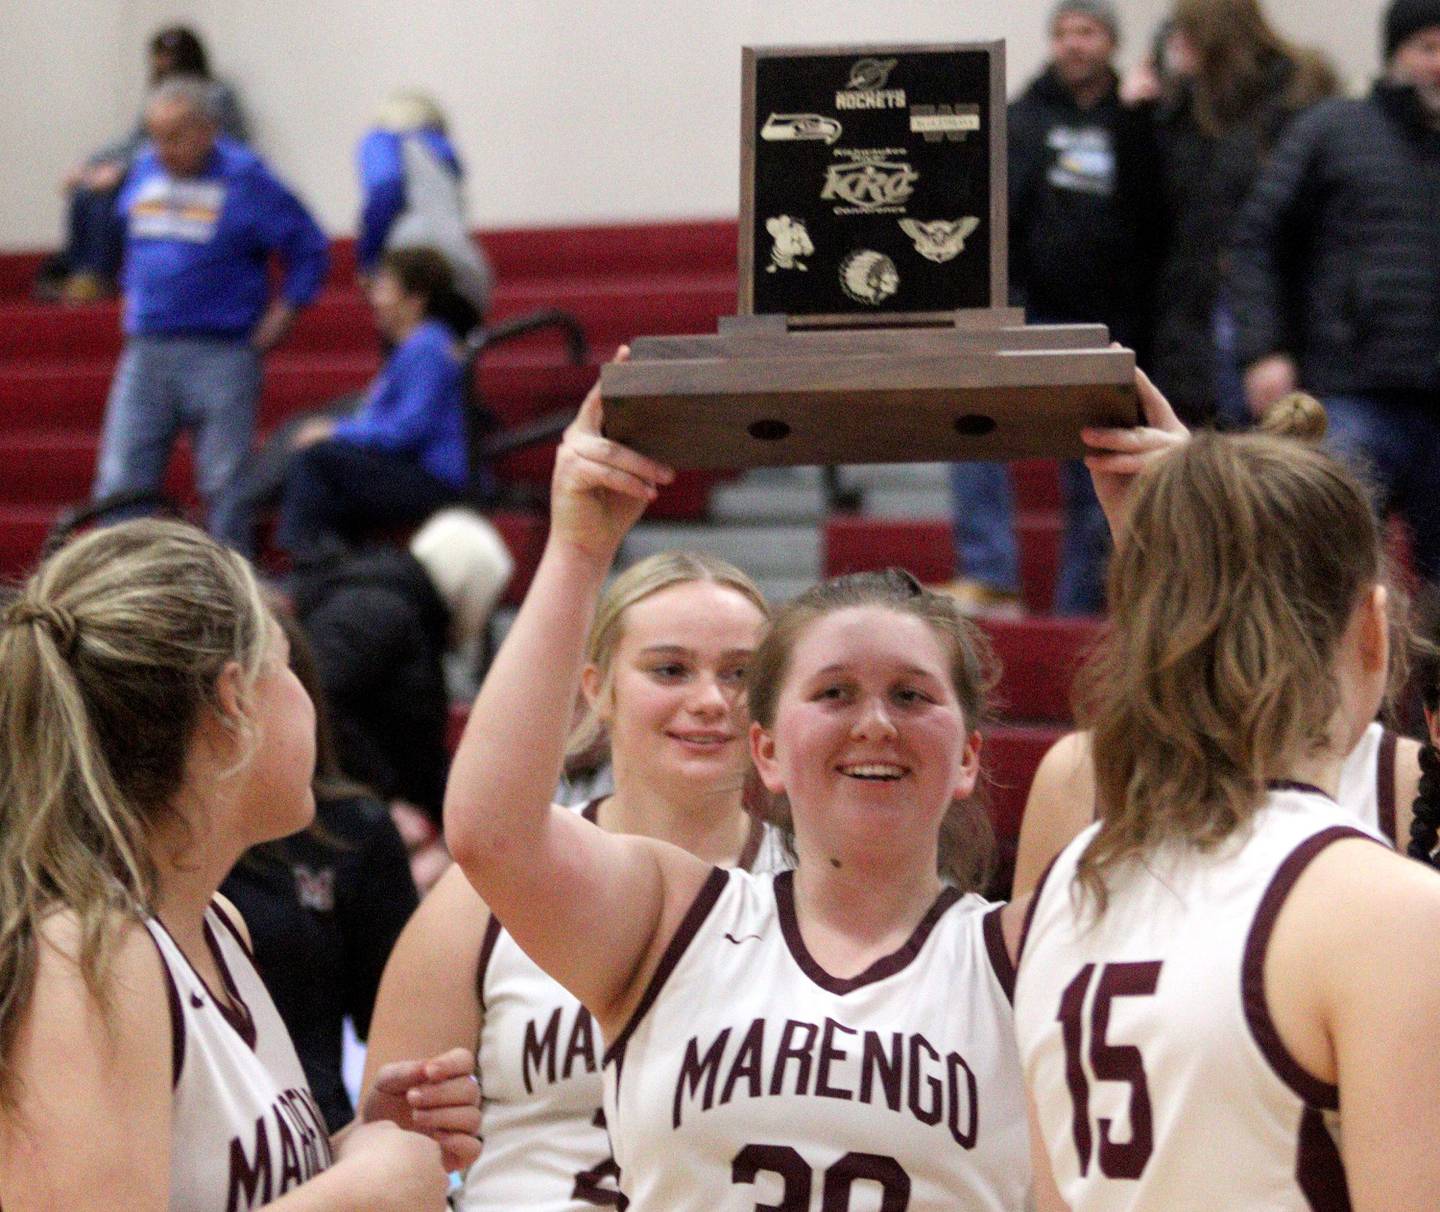 Marengo’s Addie Johnson hoists the hardware as the Indians clinched a conference title with a Tuesday victory over Johnsburg at Marengo.